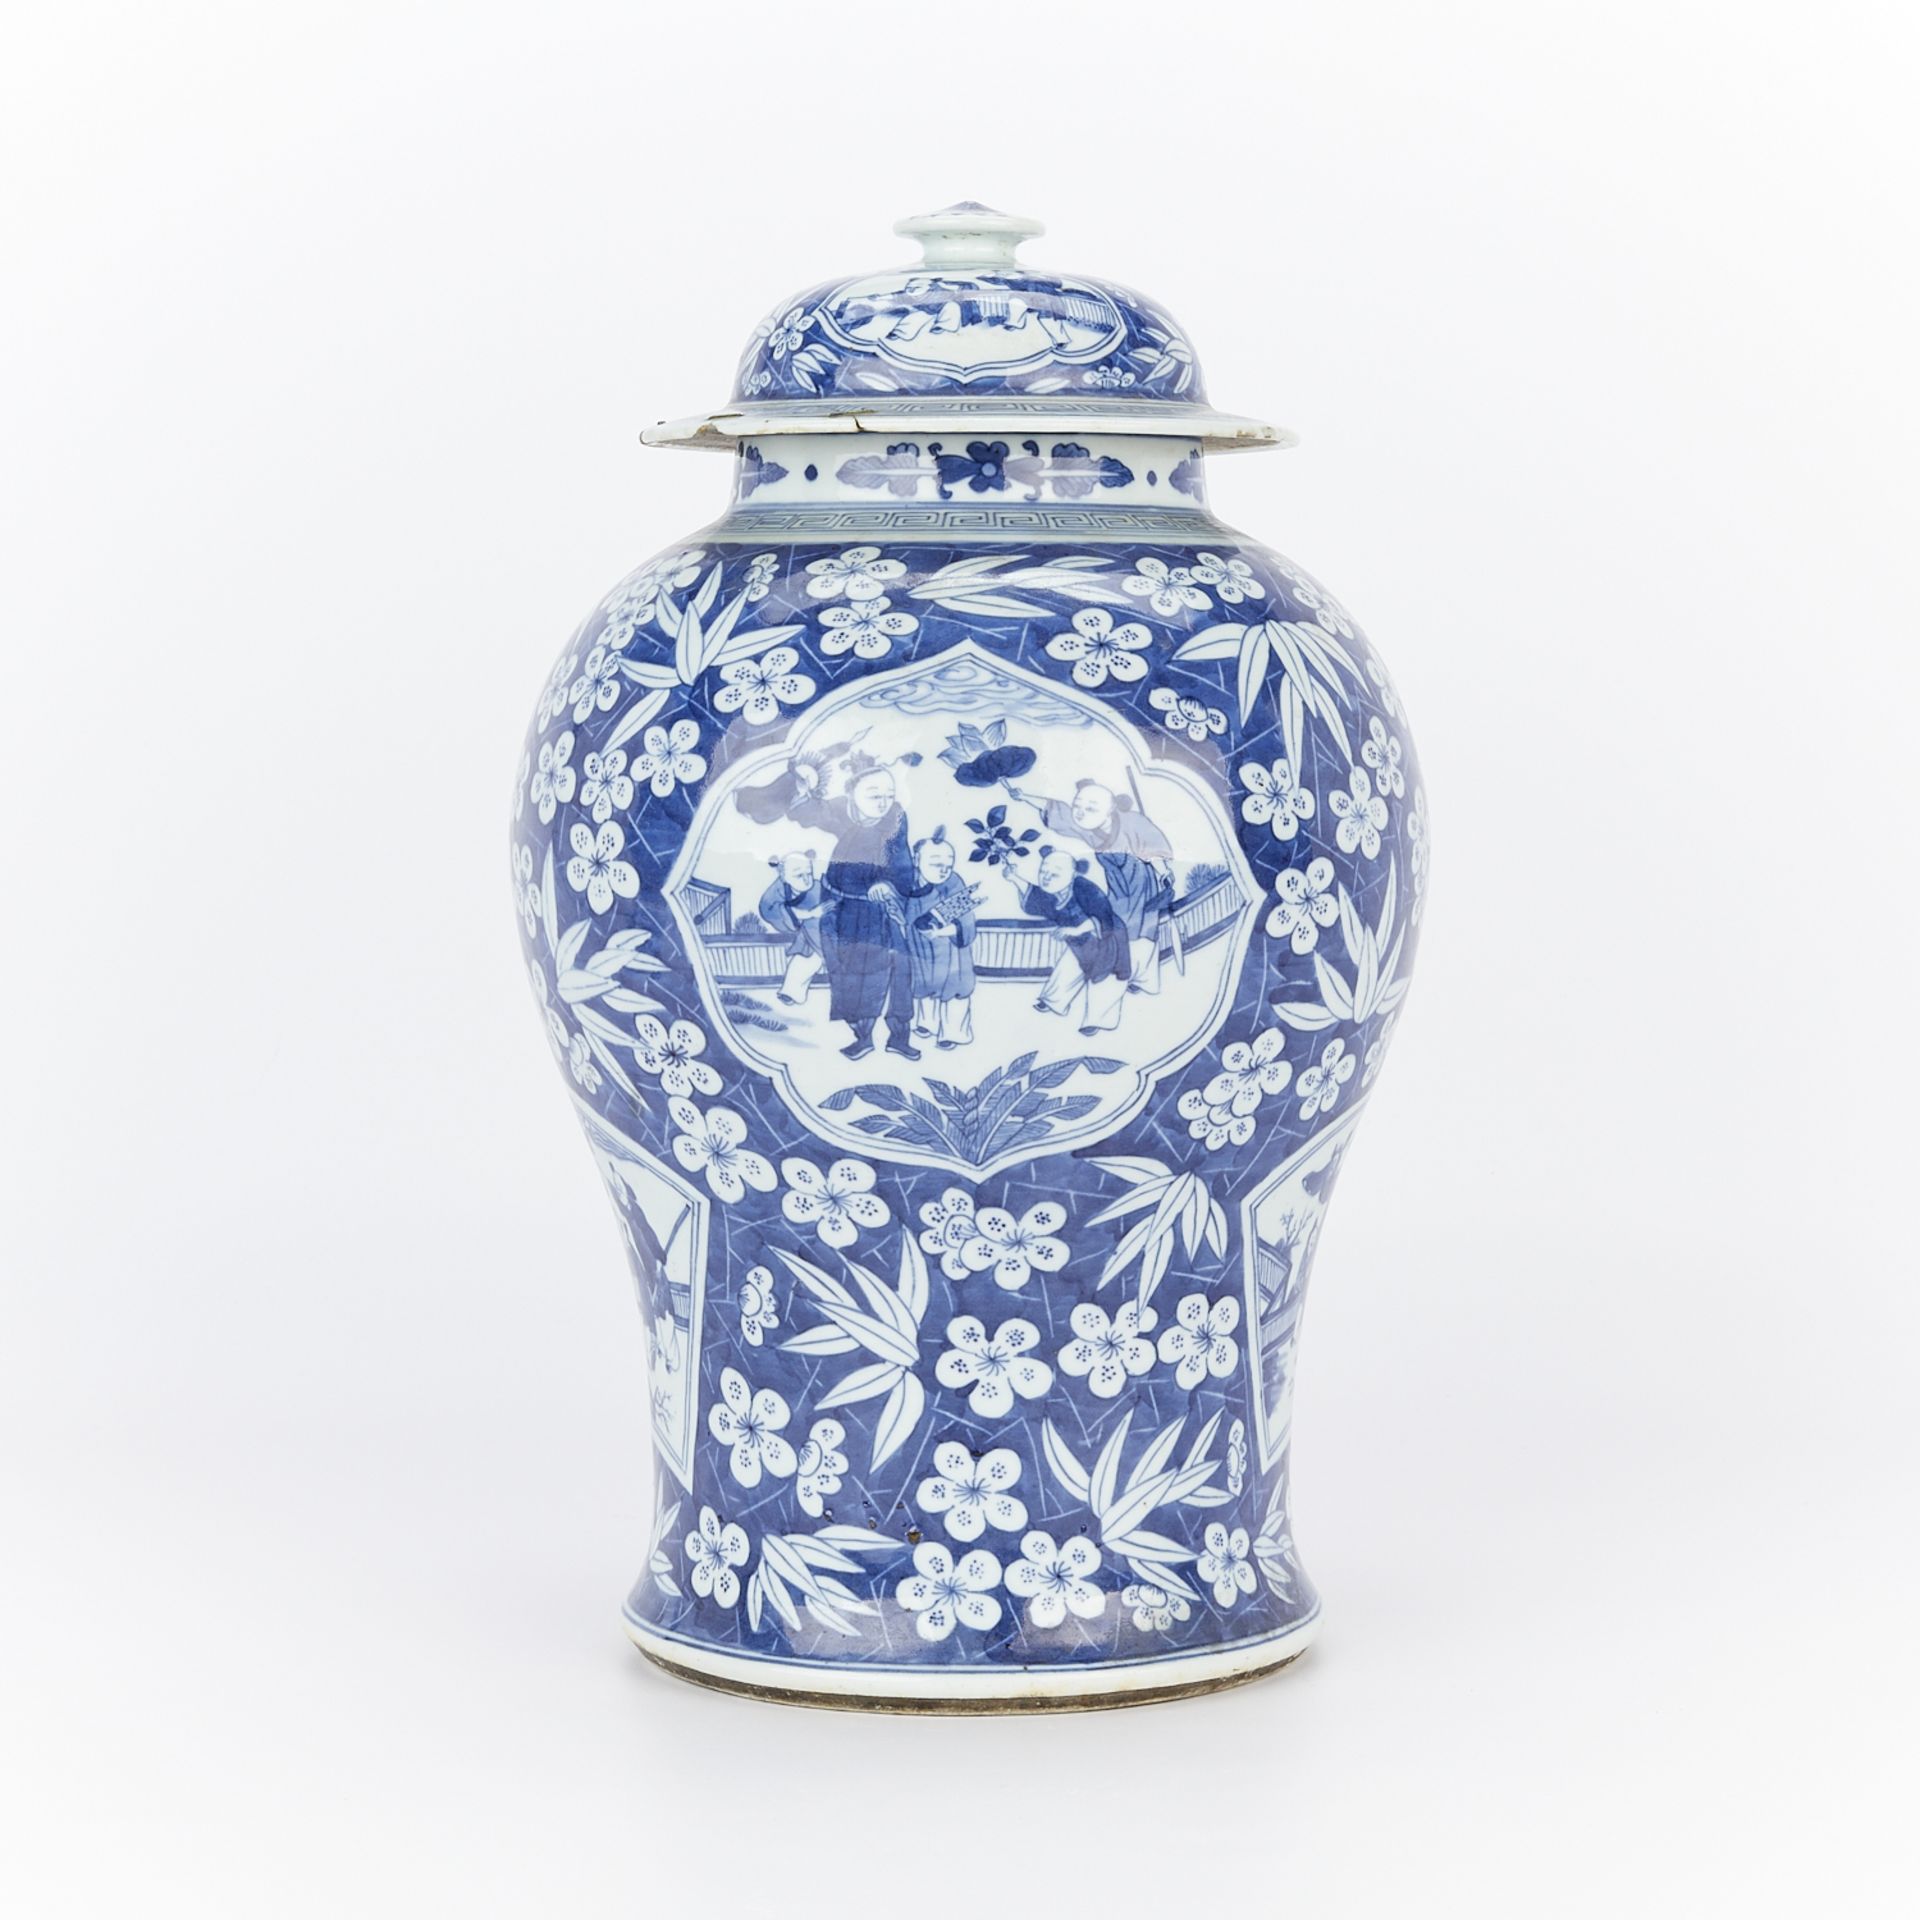 18th/19th c. Chinese B&W Porcelain Baluster Vase - Image 5 of 15